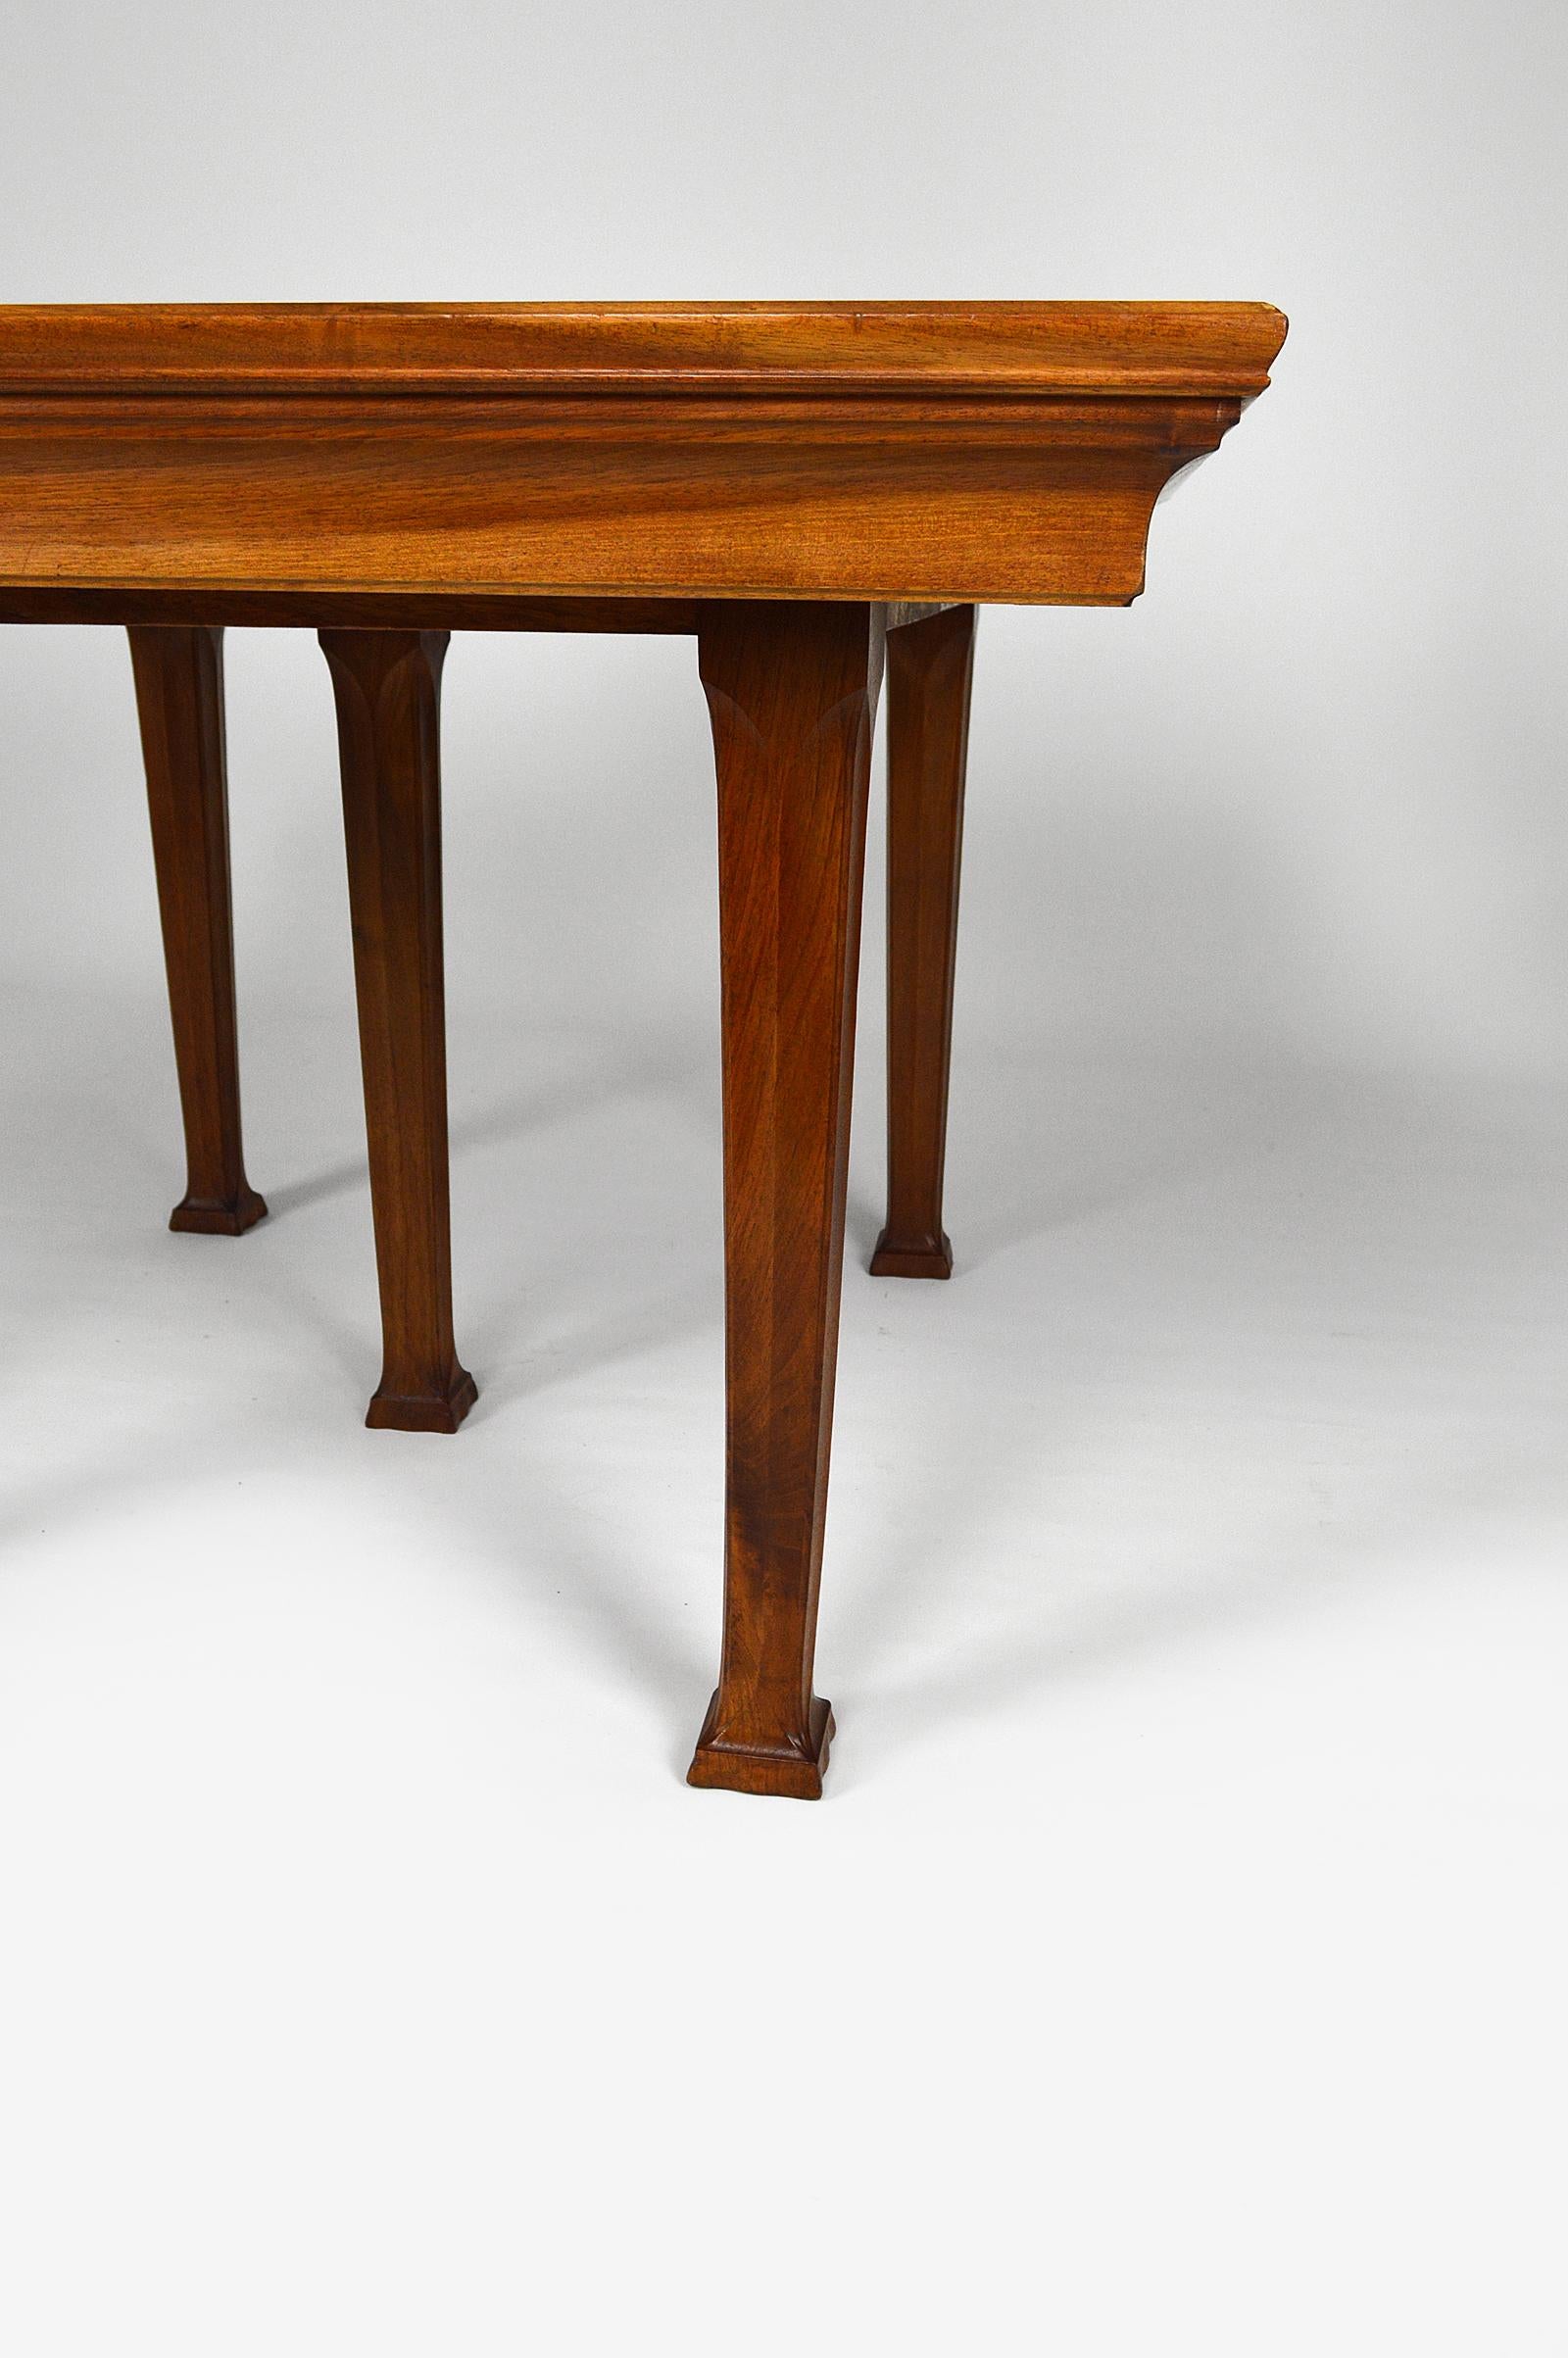 Wood Art Nouveau Carved Walnut Dining Table, circa 1905, Attributed to Georges Nowak For Sale